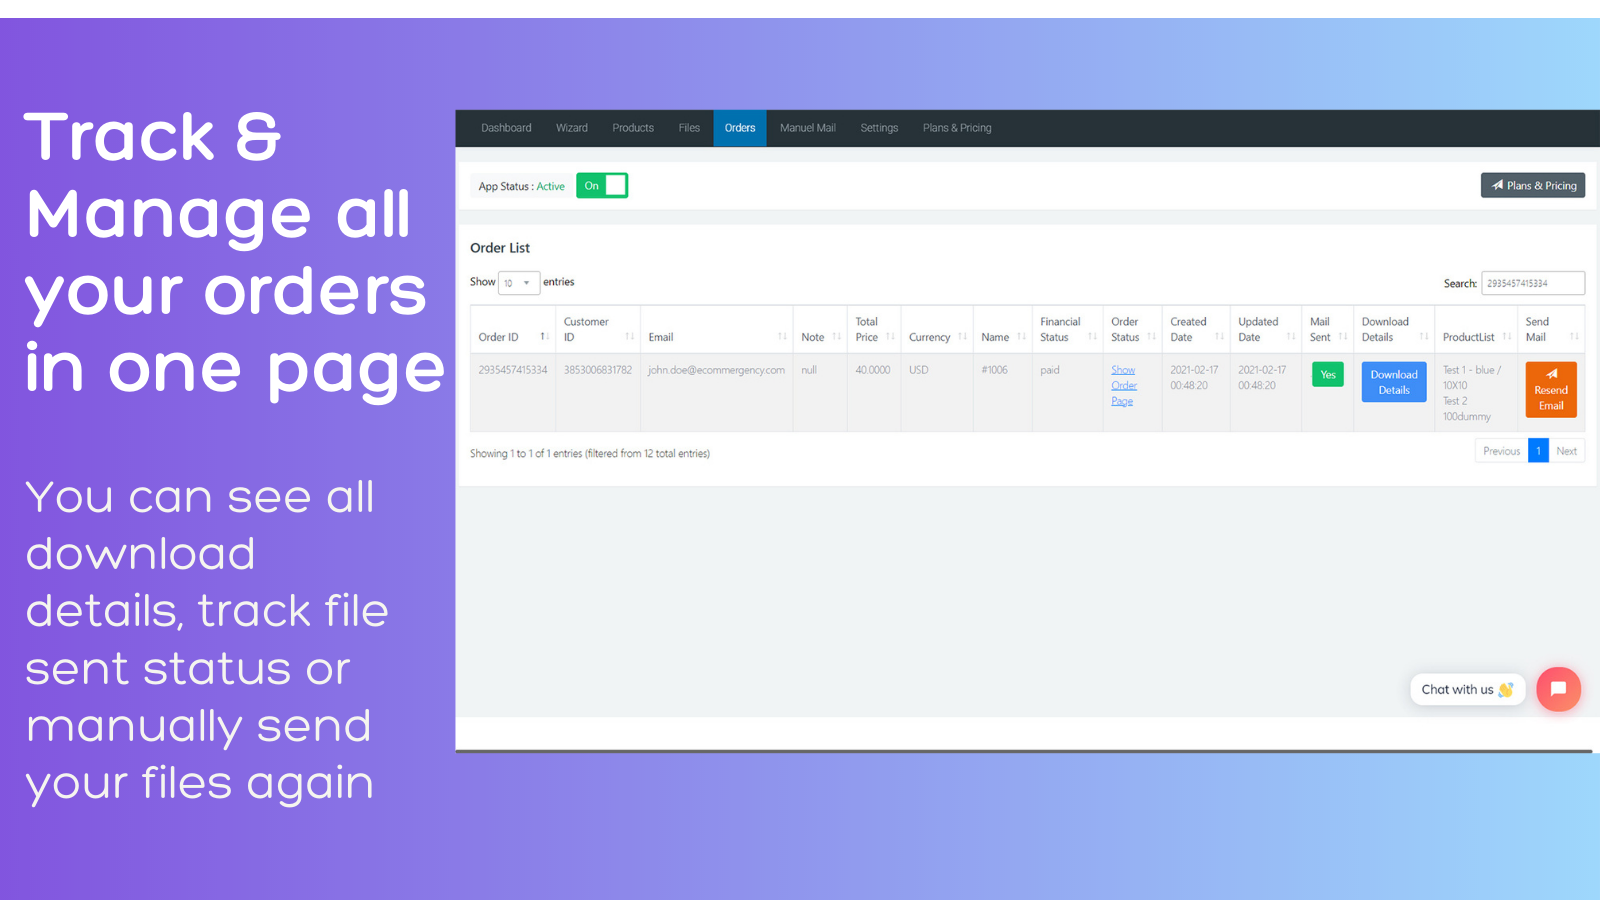 Track & Manage all your orders in one page